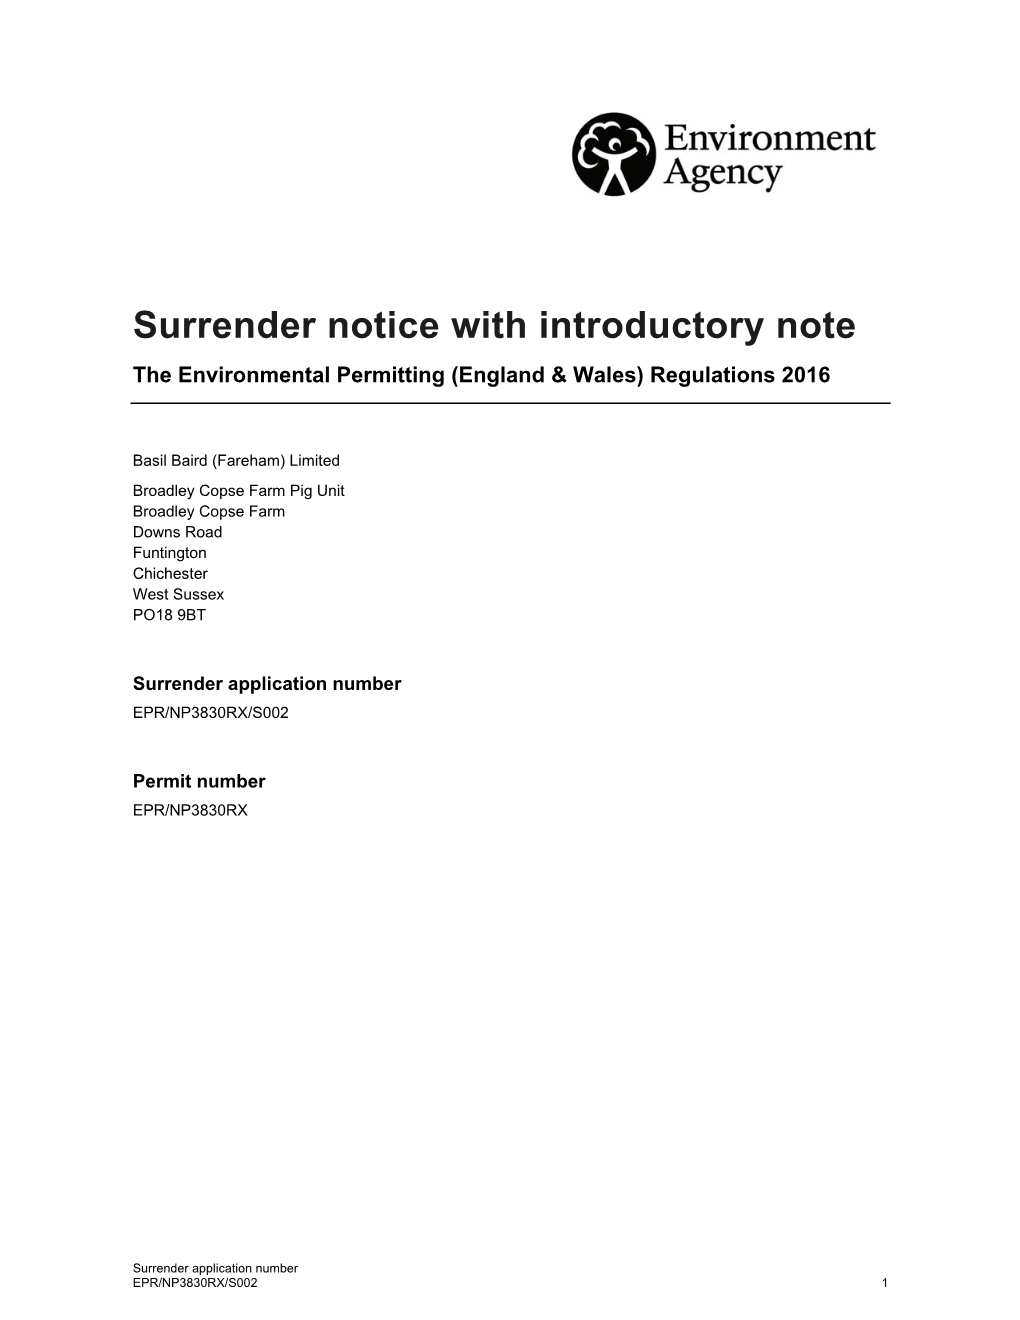 Surrender Notice with Introductory Note the Environmental Permitting (England & Wales) Regulations 2016